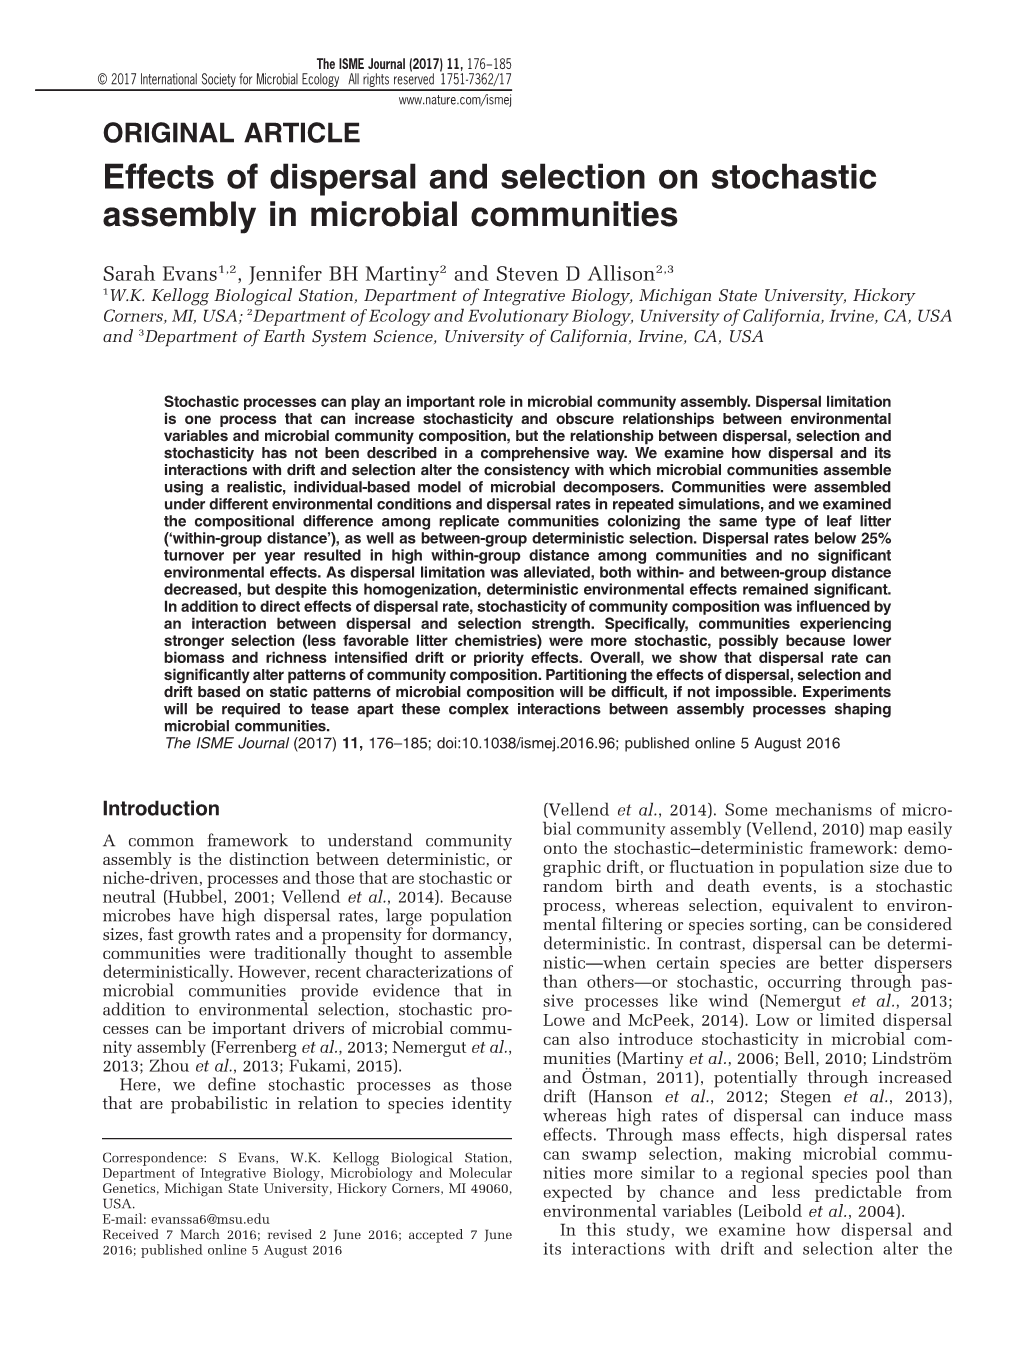 Effects of Dispersal and Selection on Stochastic Assembly in Microbial Communities